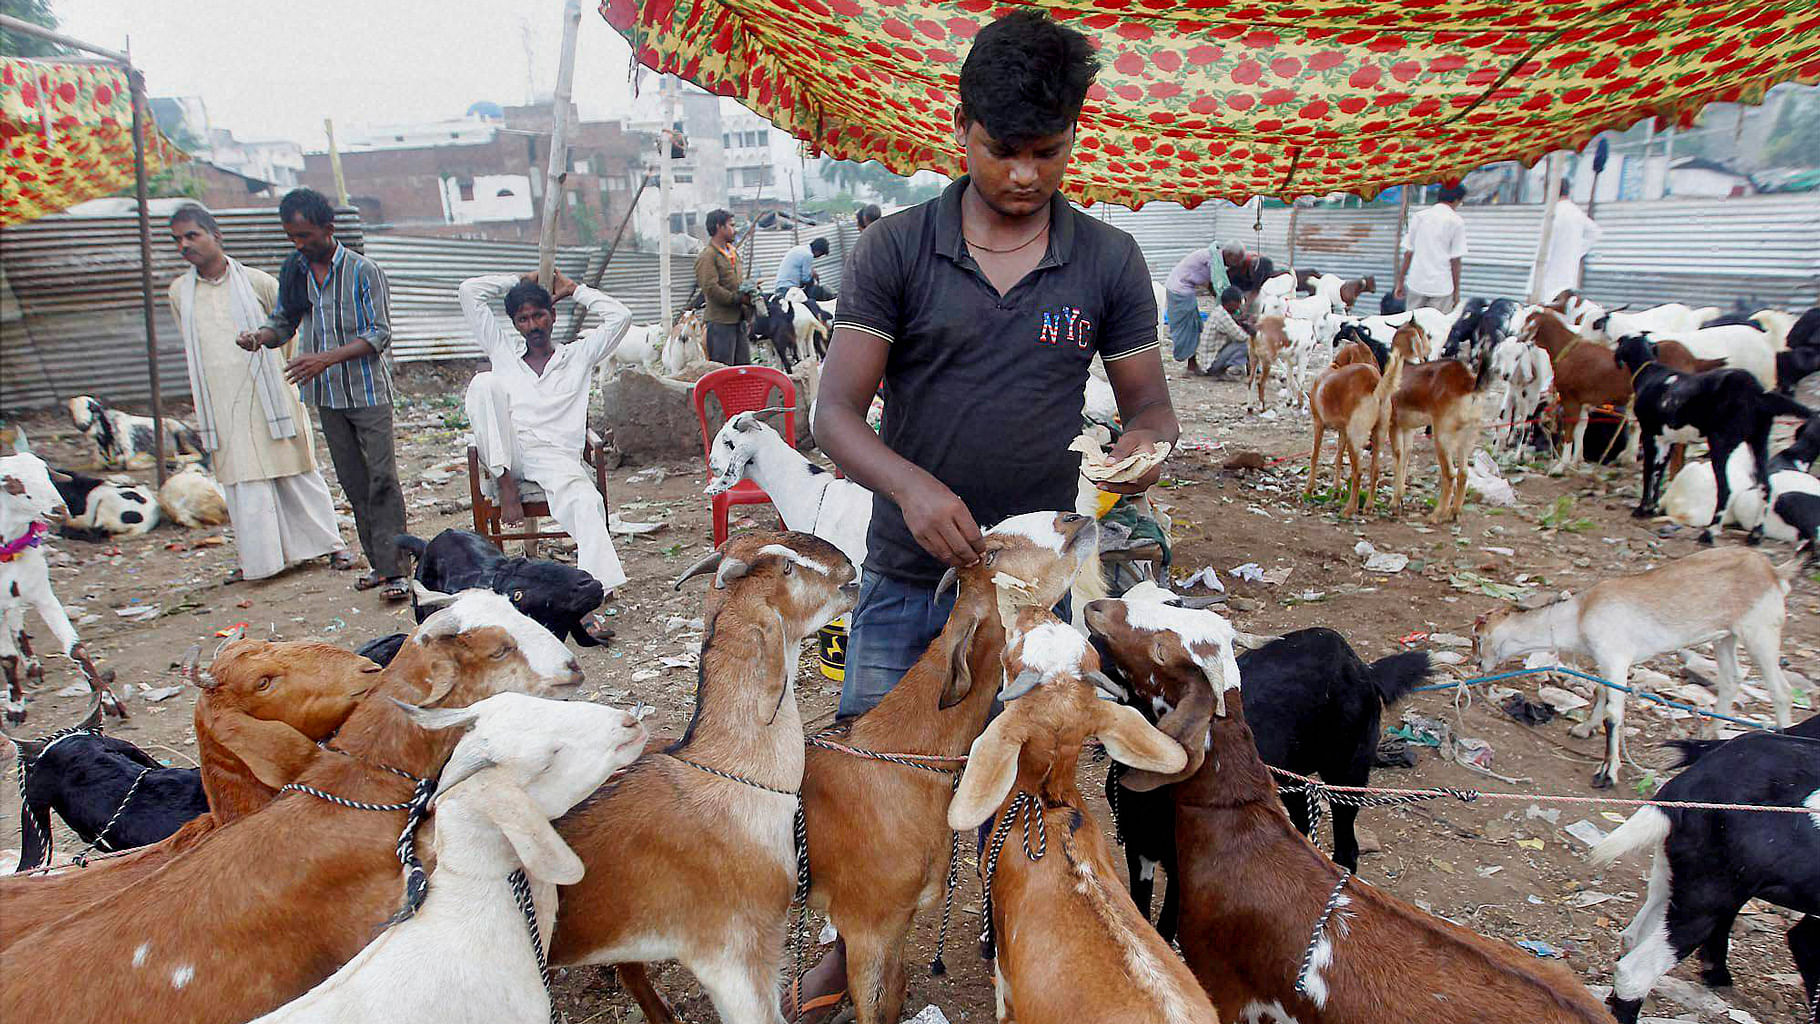 Antonette Pinto wrote an article a day after Bakrid complaining about “animals being slaughtered in her housing society.” (Photo: <b>The Quint</b>)